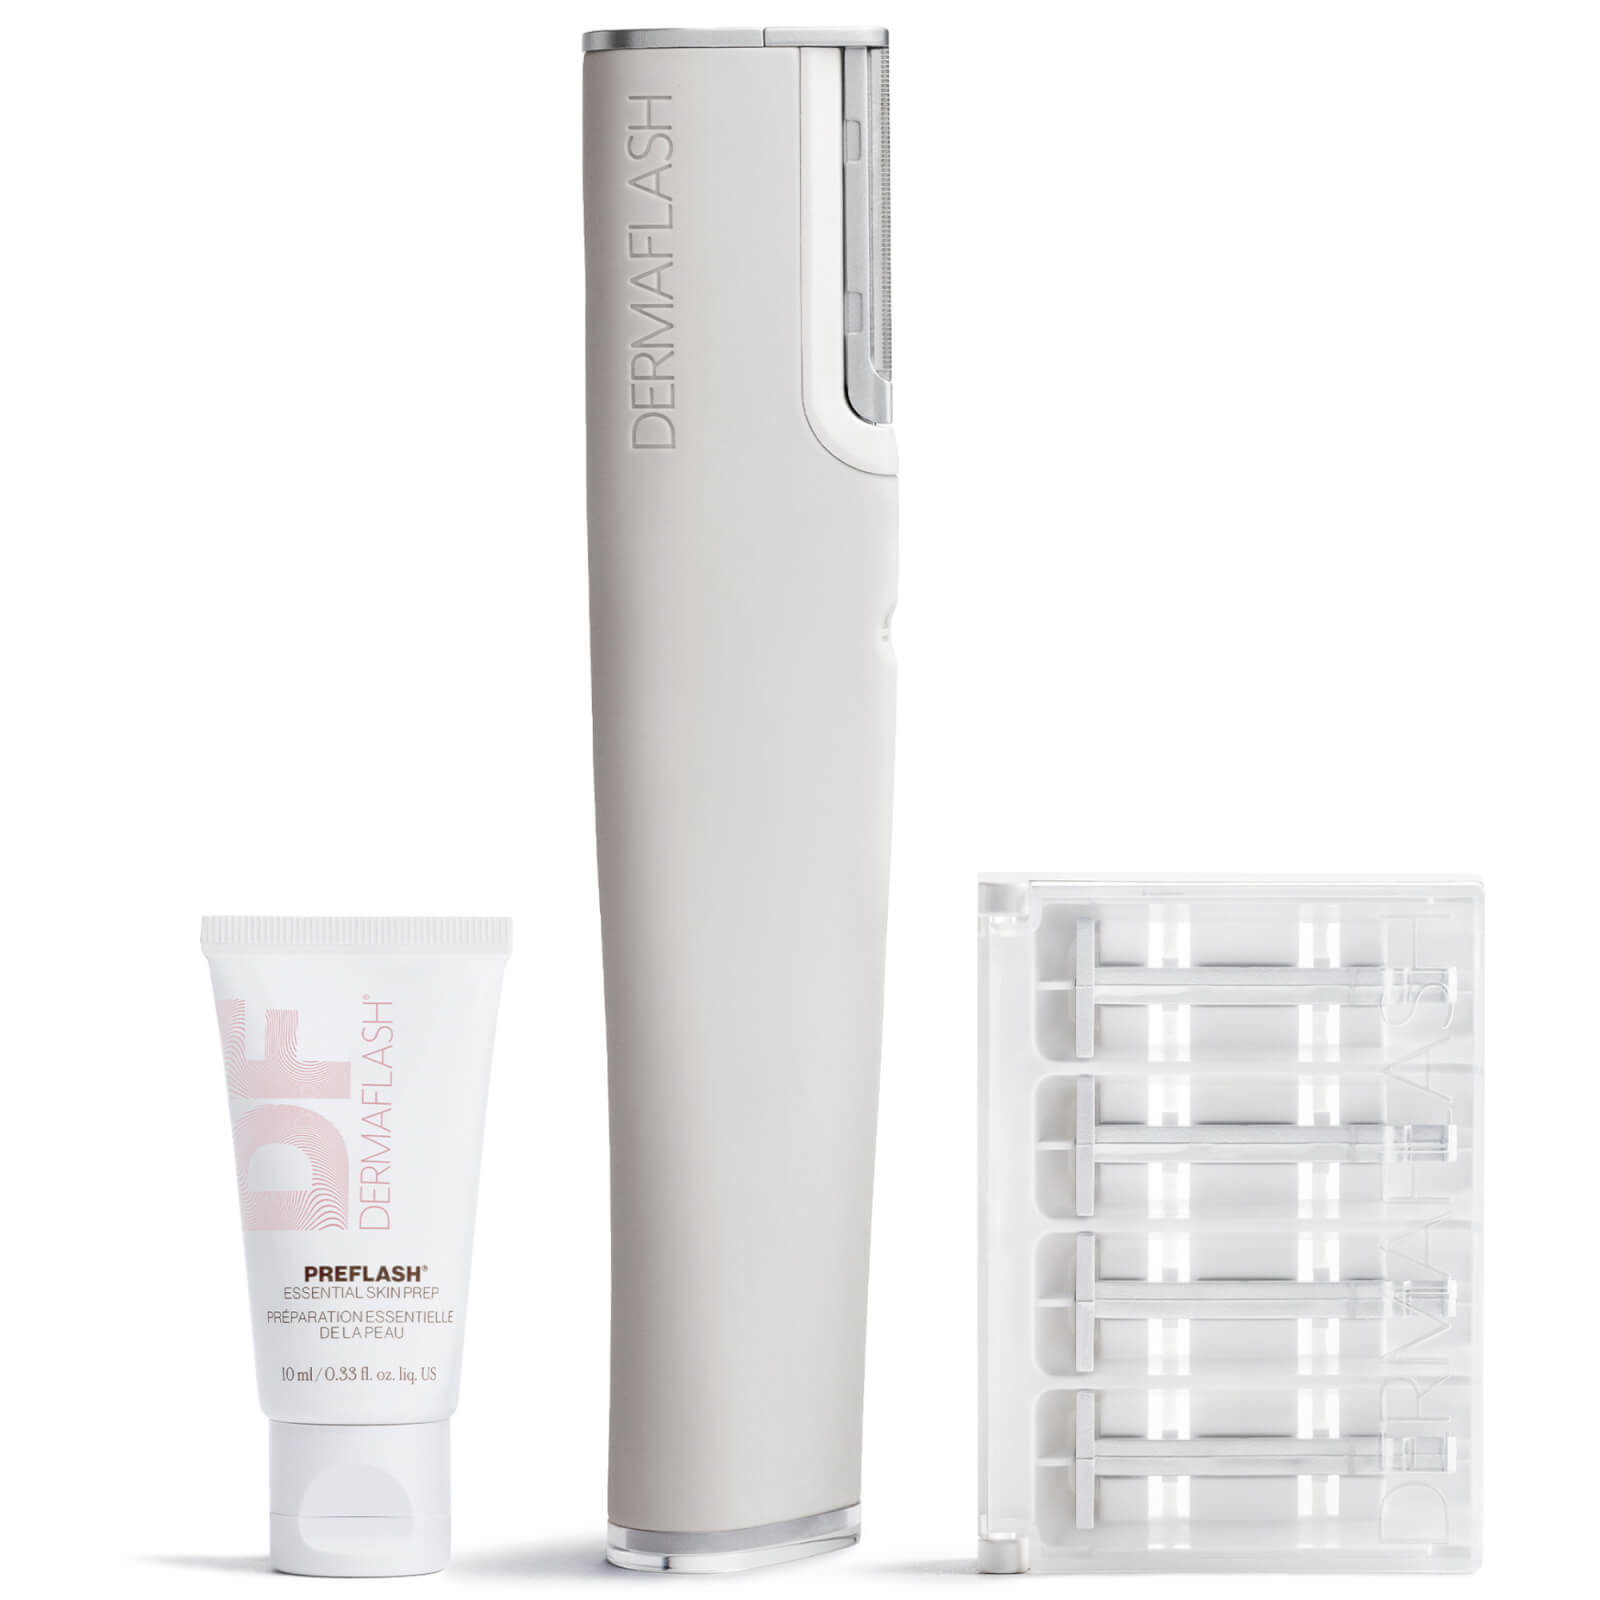 DERMAFLASH Luxe+ Advanced Sonic Dermaplaning and Peach Fuzz Removal - Stone